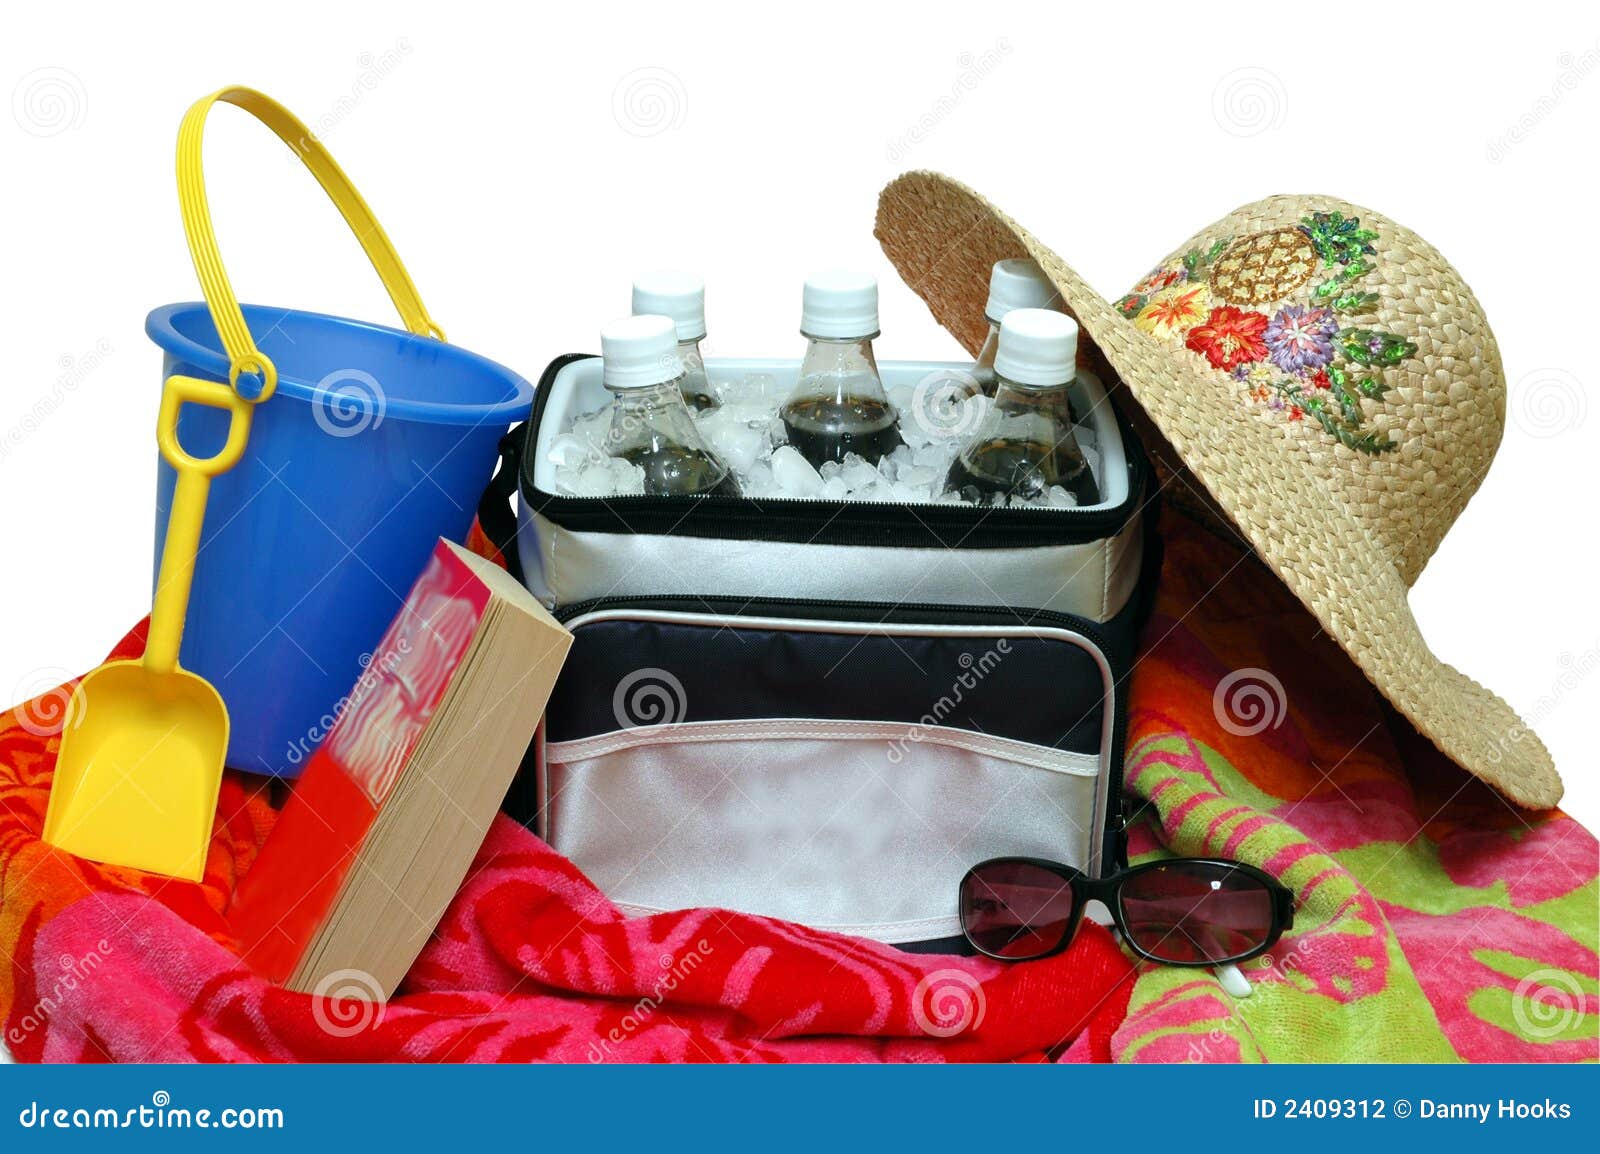 Beach Towel, Cooler, and Sand Pail Stock Photo - Image of paperback ...